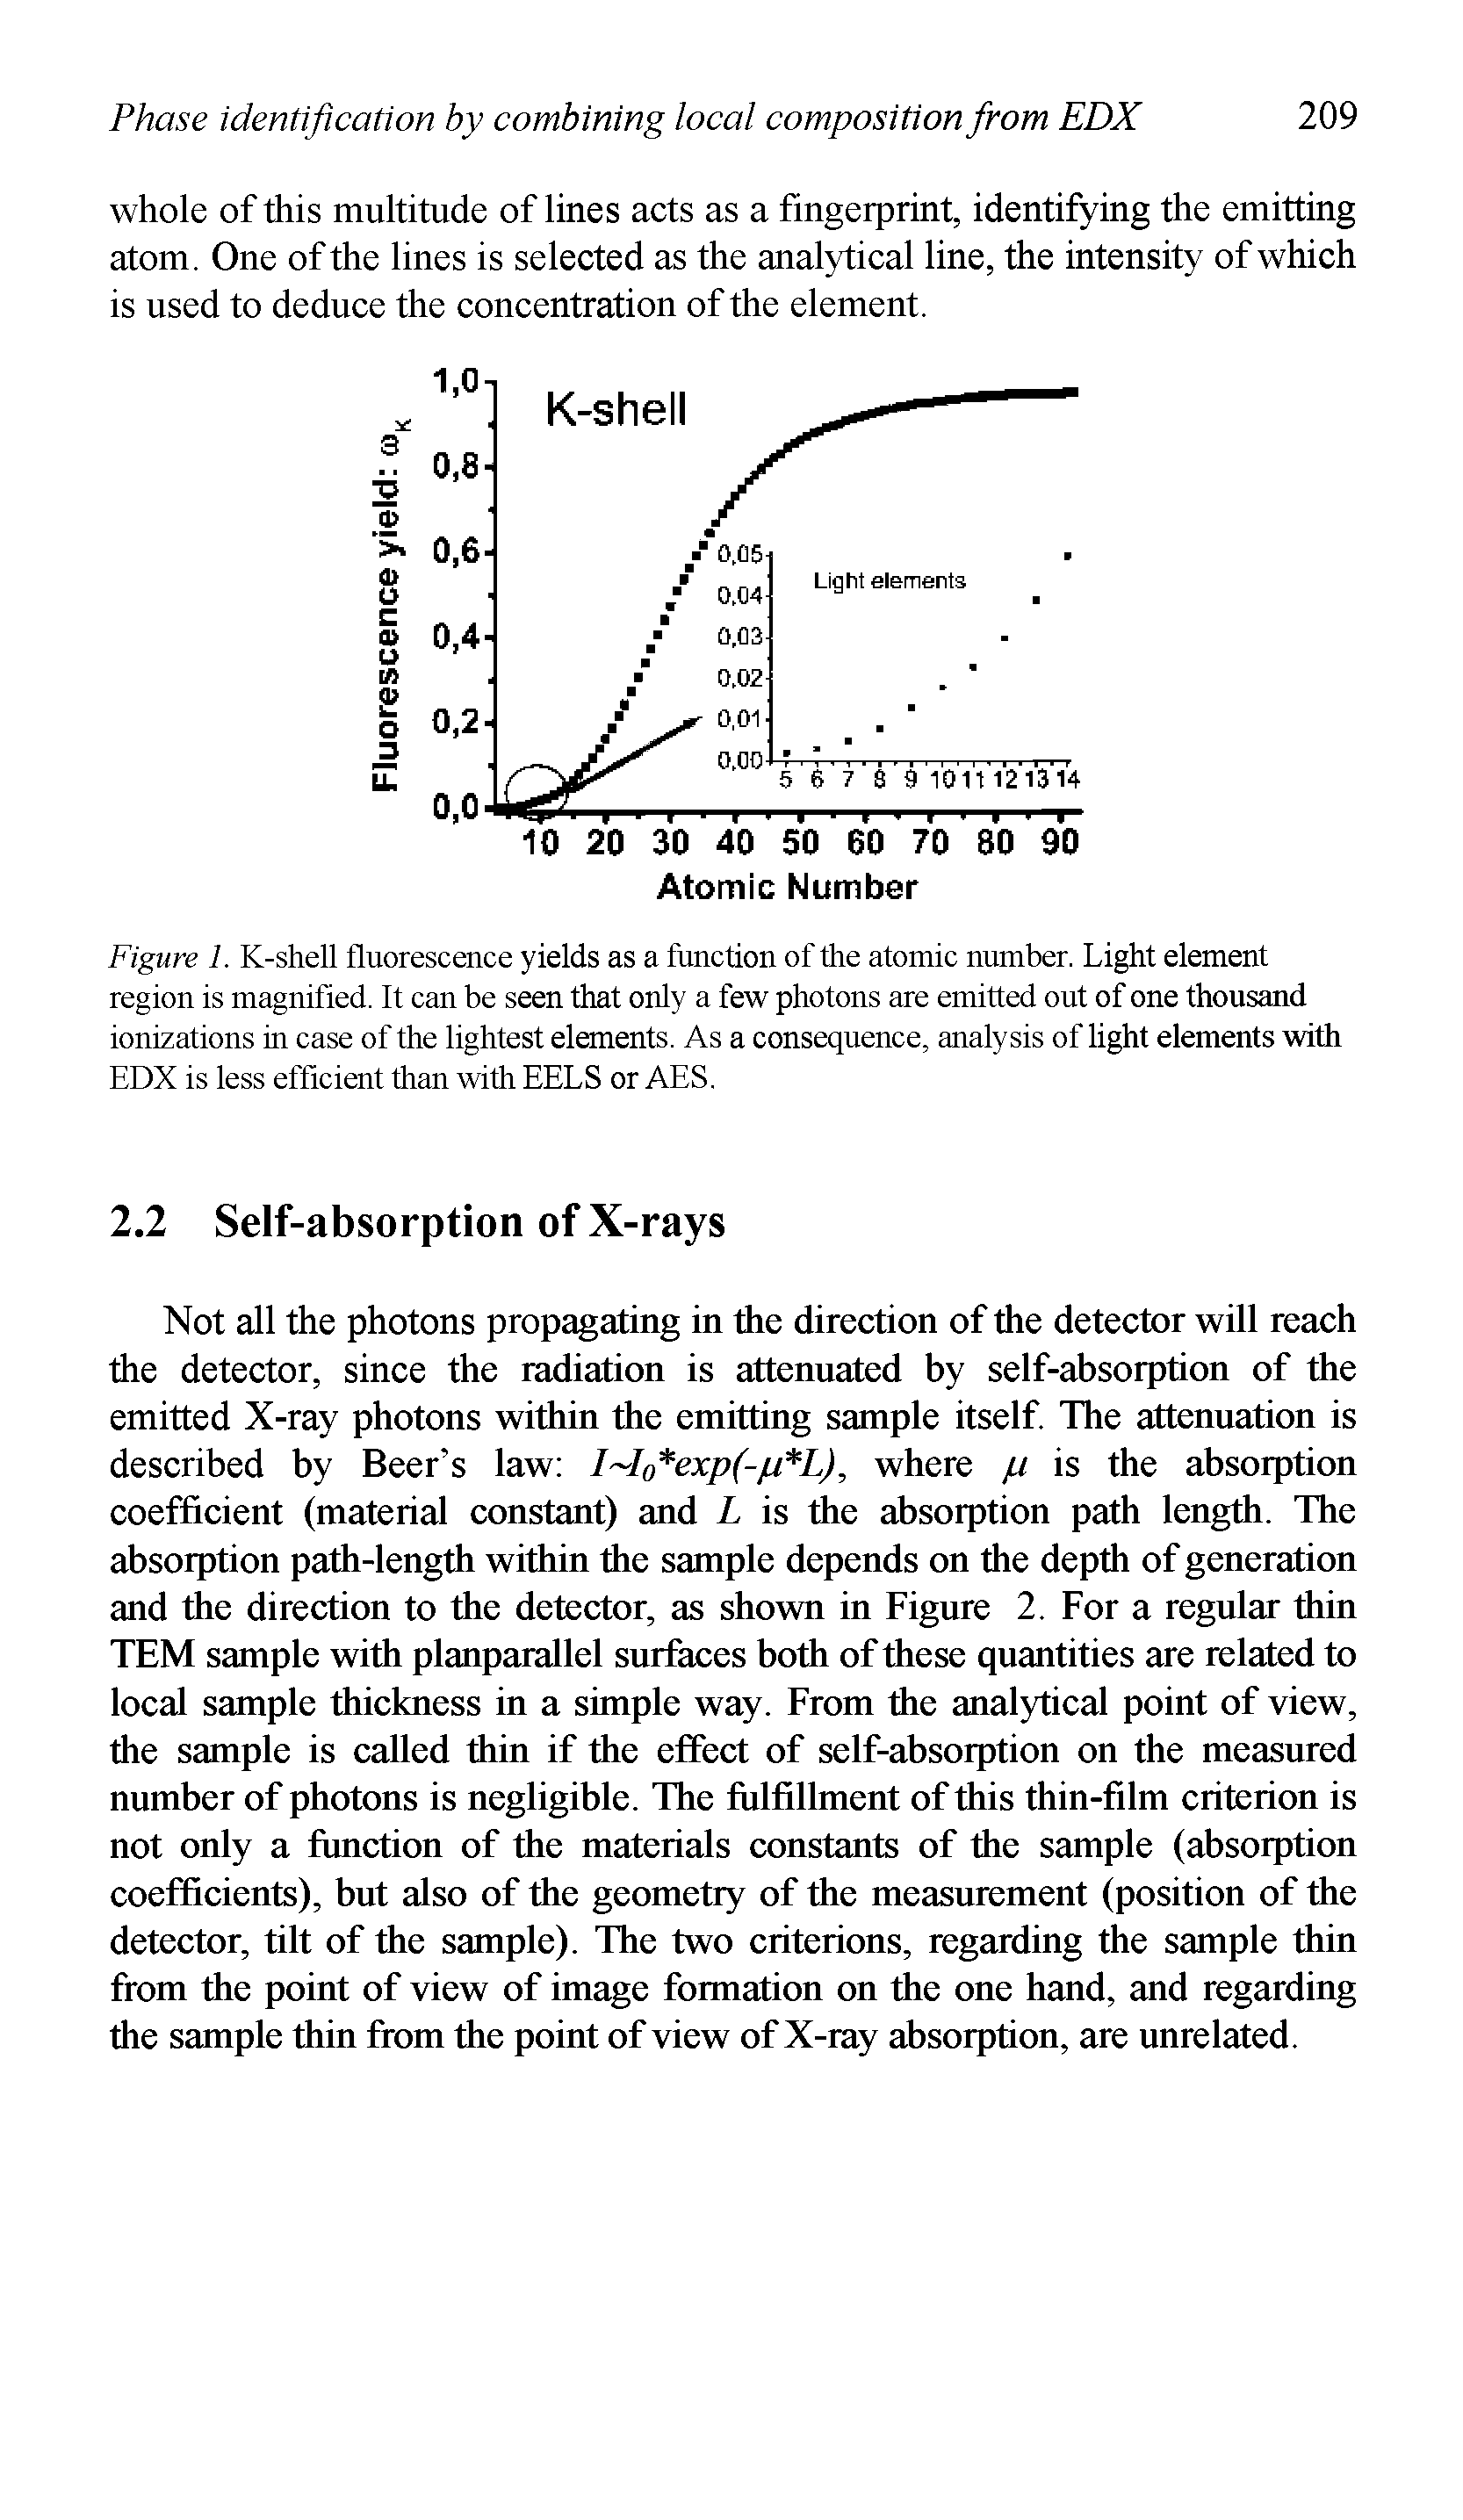 Figure 1. K-shell fluorescence yields as a function of the atomic number. Light element region is magnified. It can be seen that only a few photons are emitted out of one thousand ionizations in case of the lightest elements. As a consequence, analysis of light elements with EDX is less efficient than with EELS or AES.